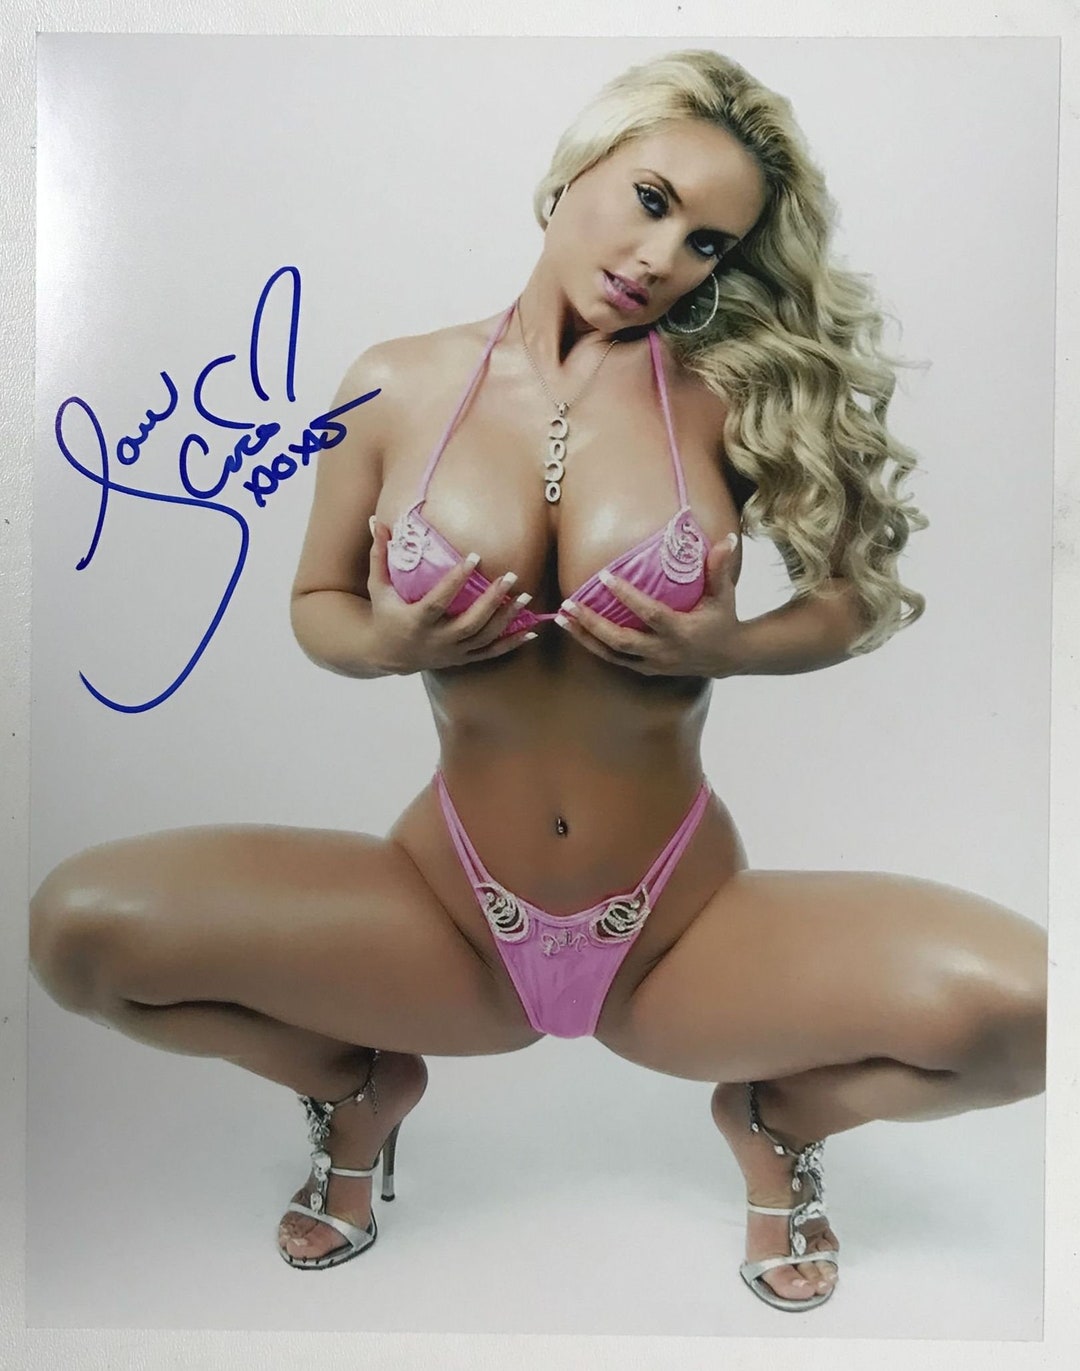 Coco Austin Signed Autographed Glossy 11x14 Photo